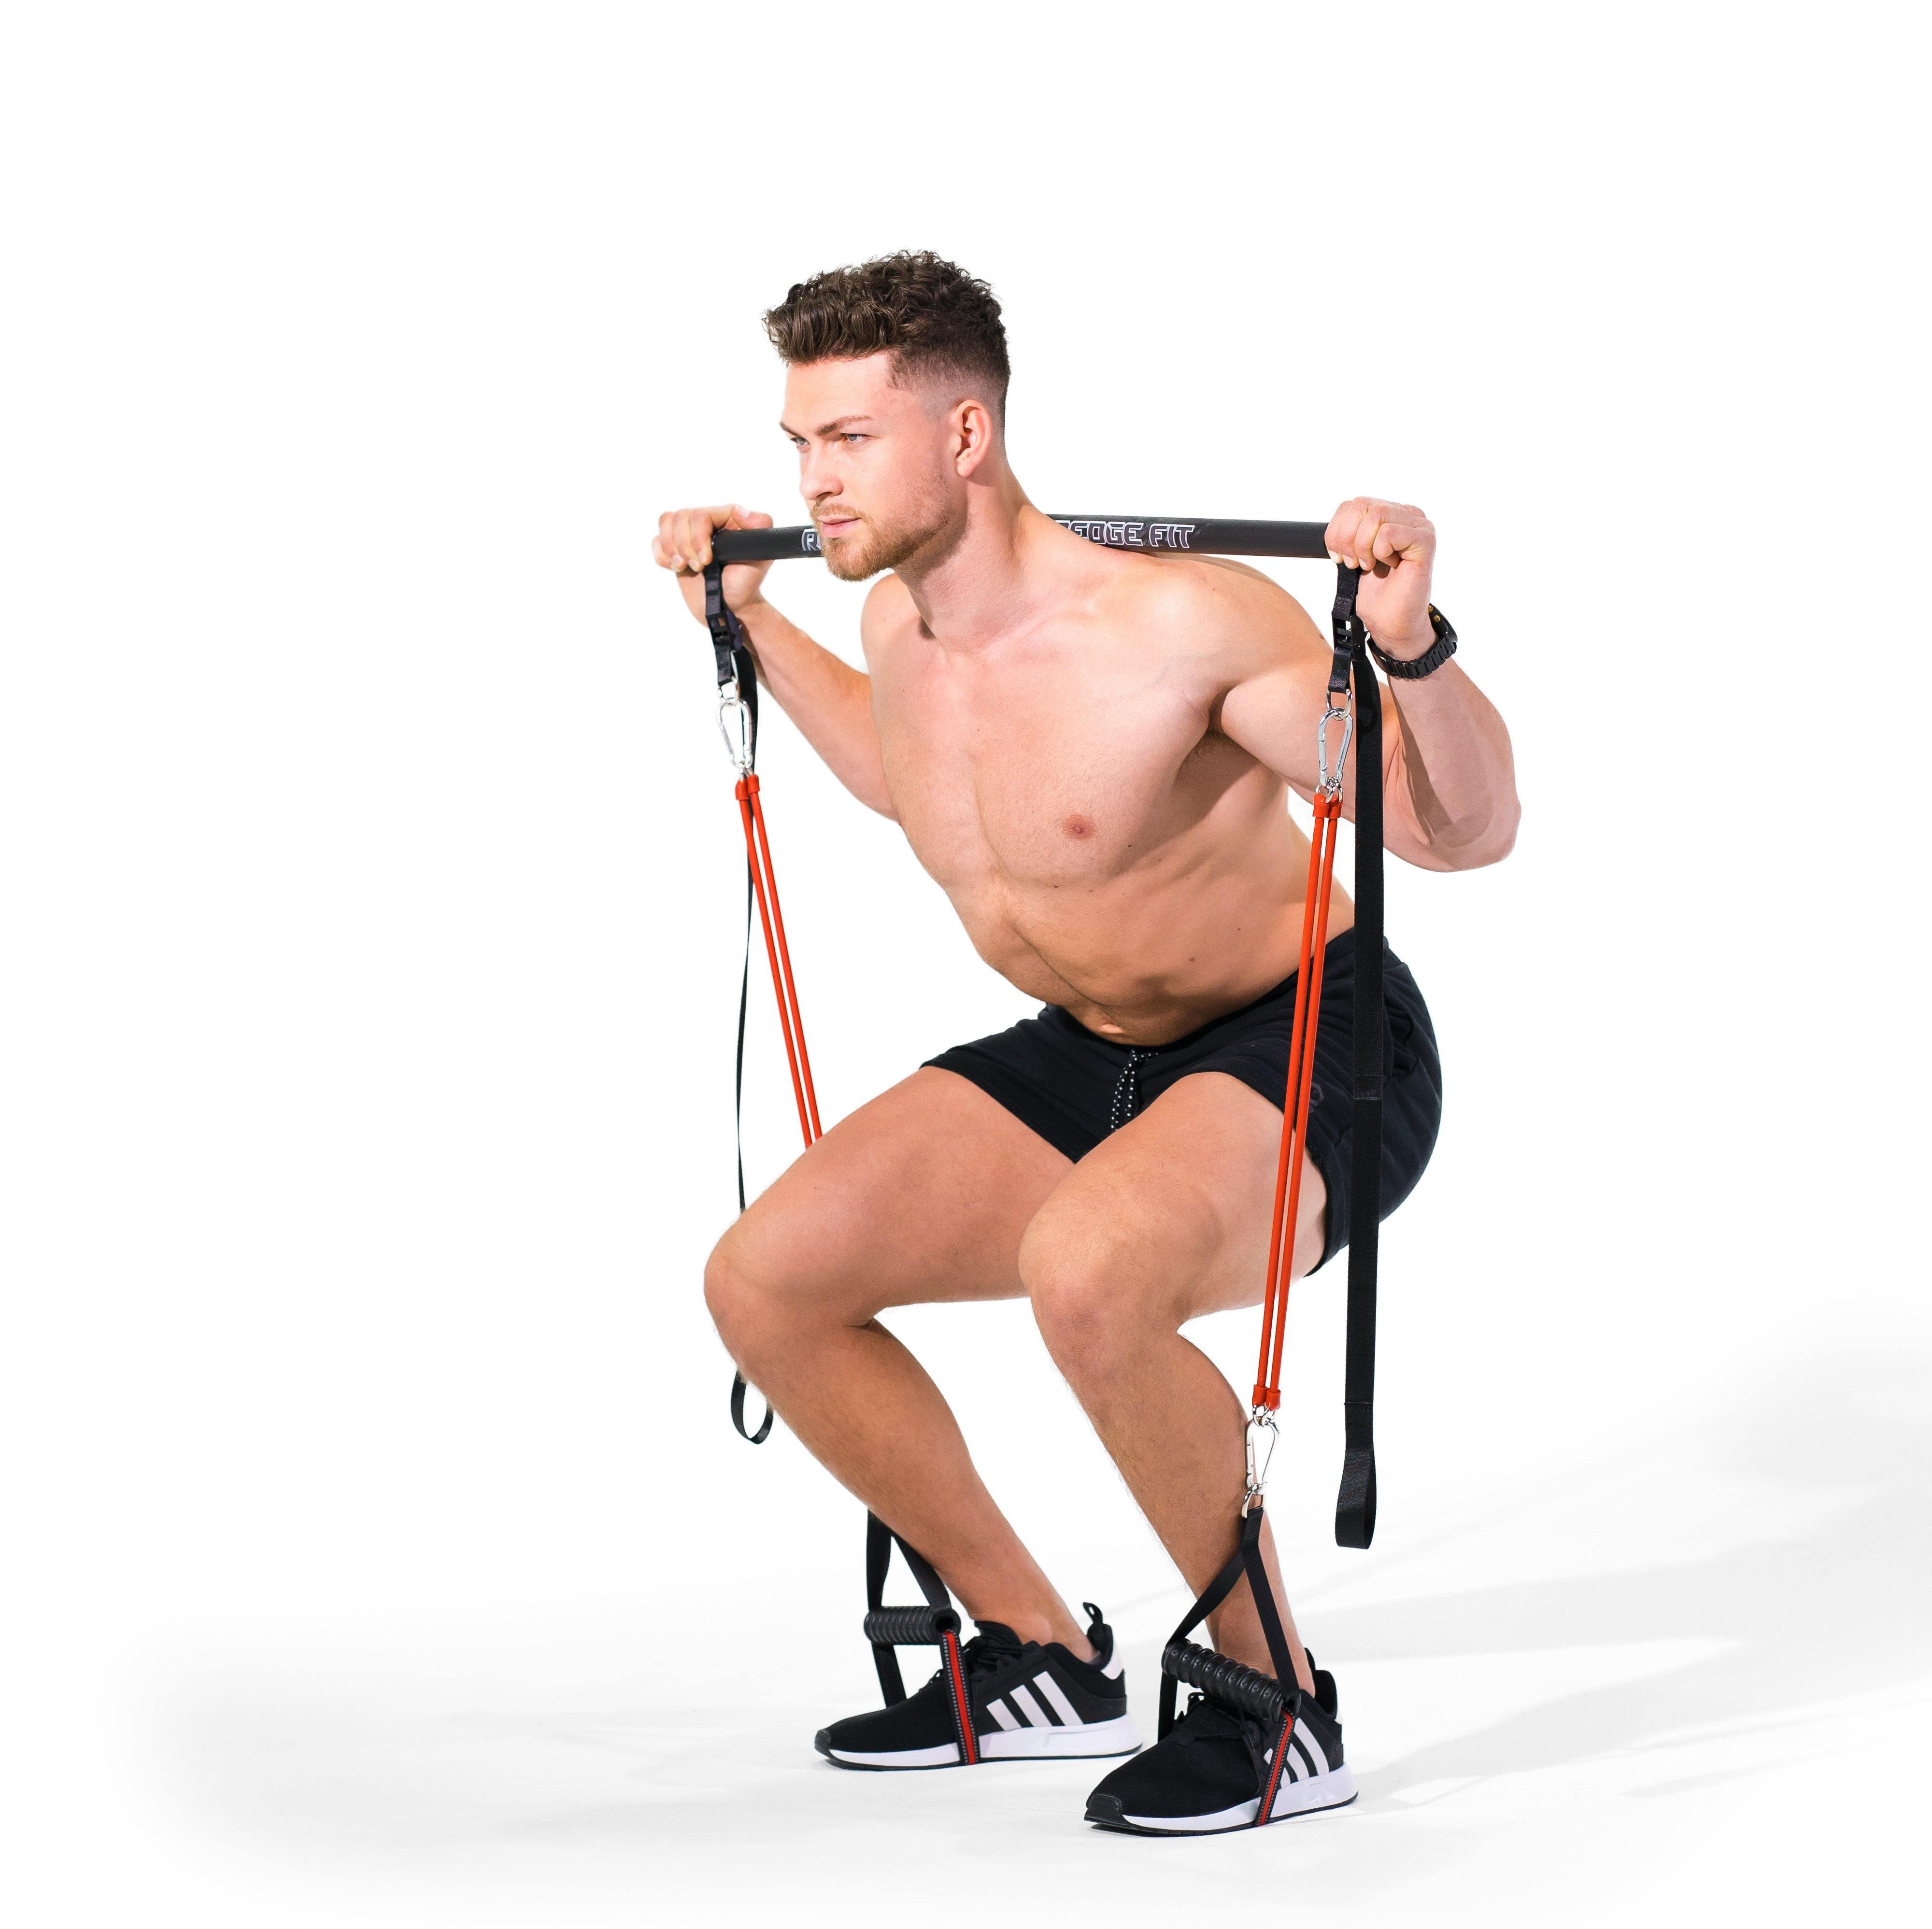 Man modeling the Redge Fit Home Gym Pro Pack Portable Gym Machine Available at https://www.getredge.com/products/home-gym-pro-pack